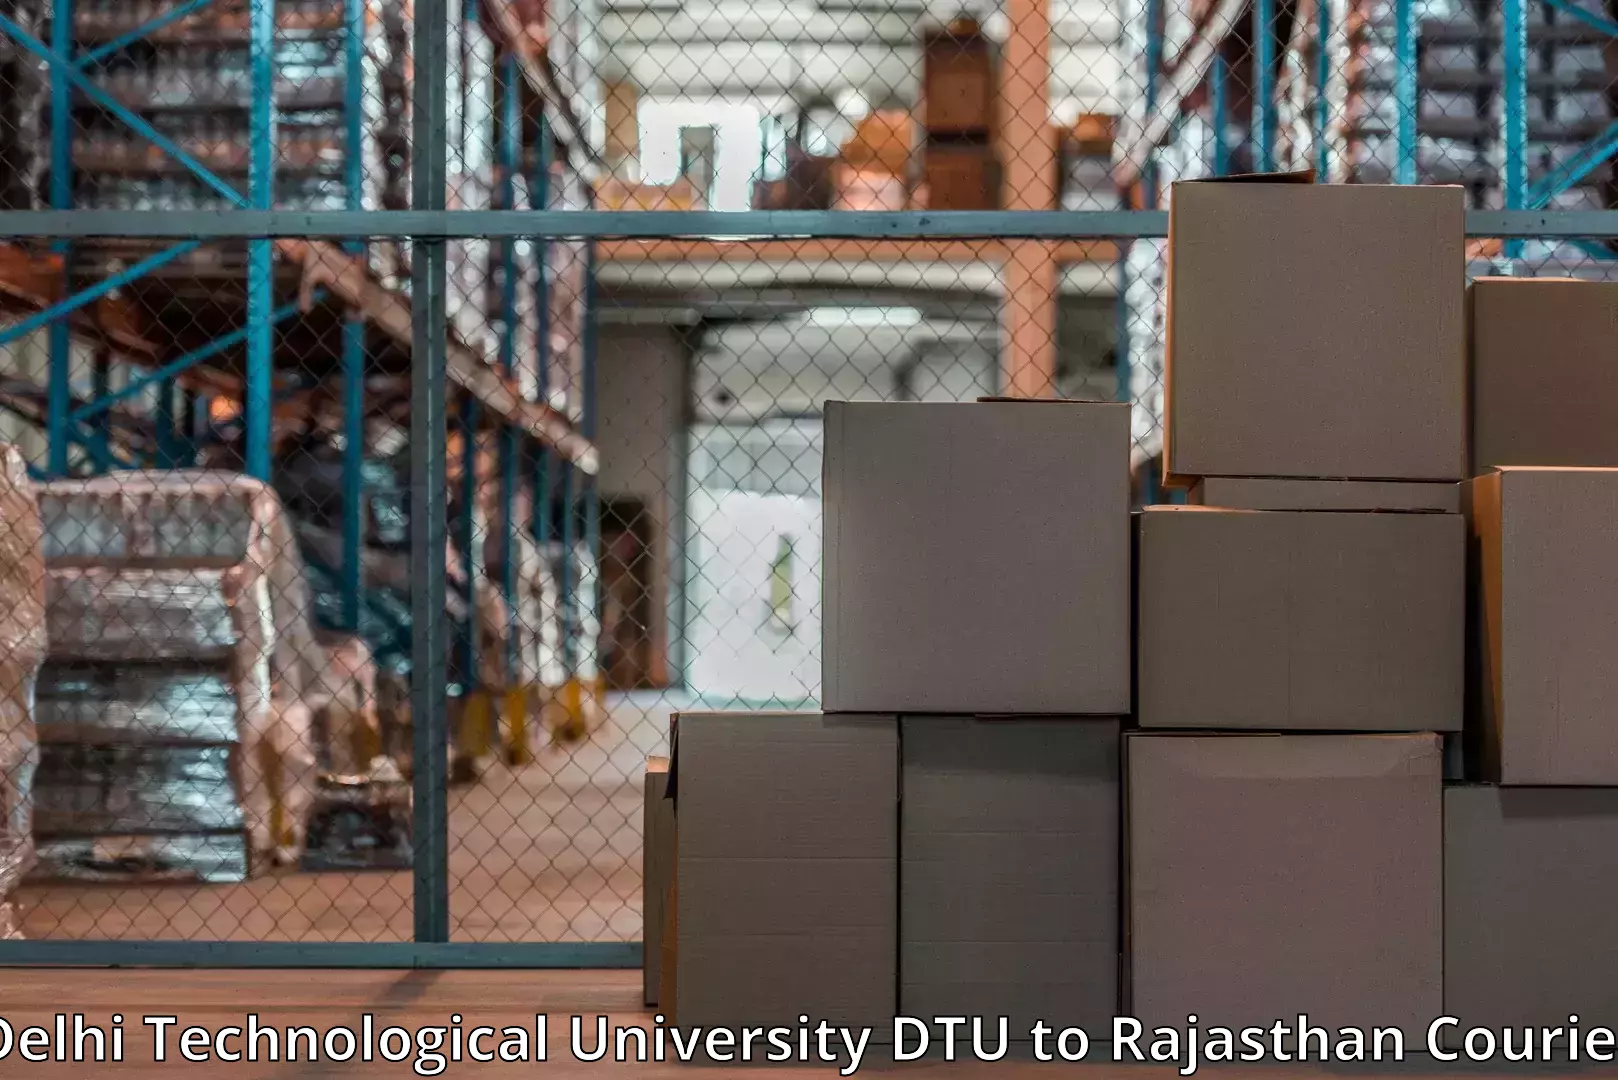 Home relocation experts Delhi Technological University DTU to Yeswanthapur